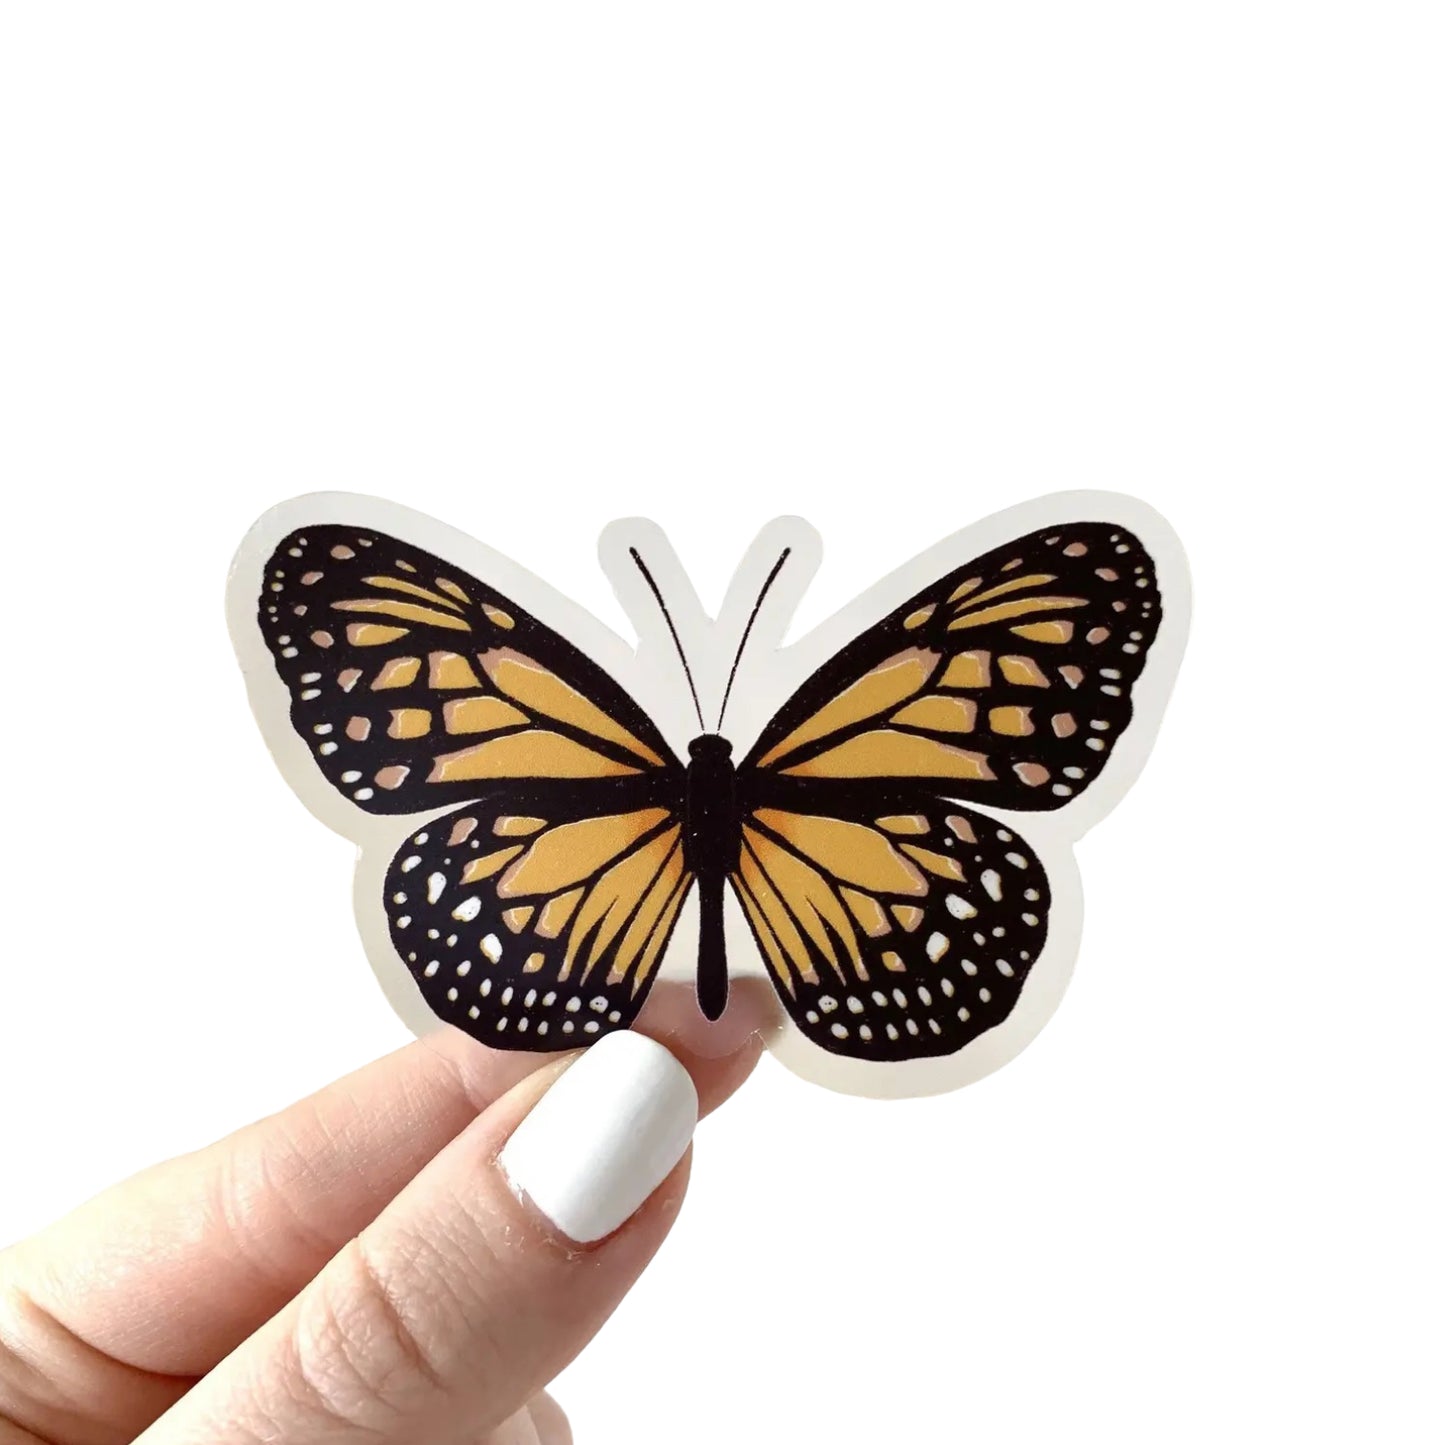 Painted Lady Butterfly Vinyl Sticker by Elyse Breanne Designs